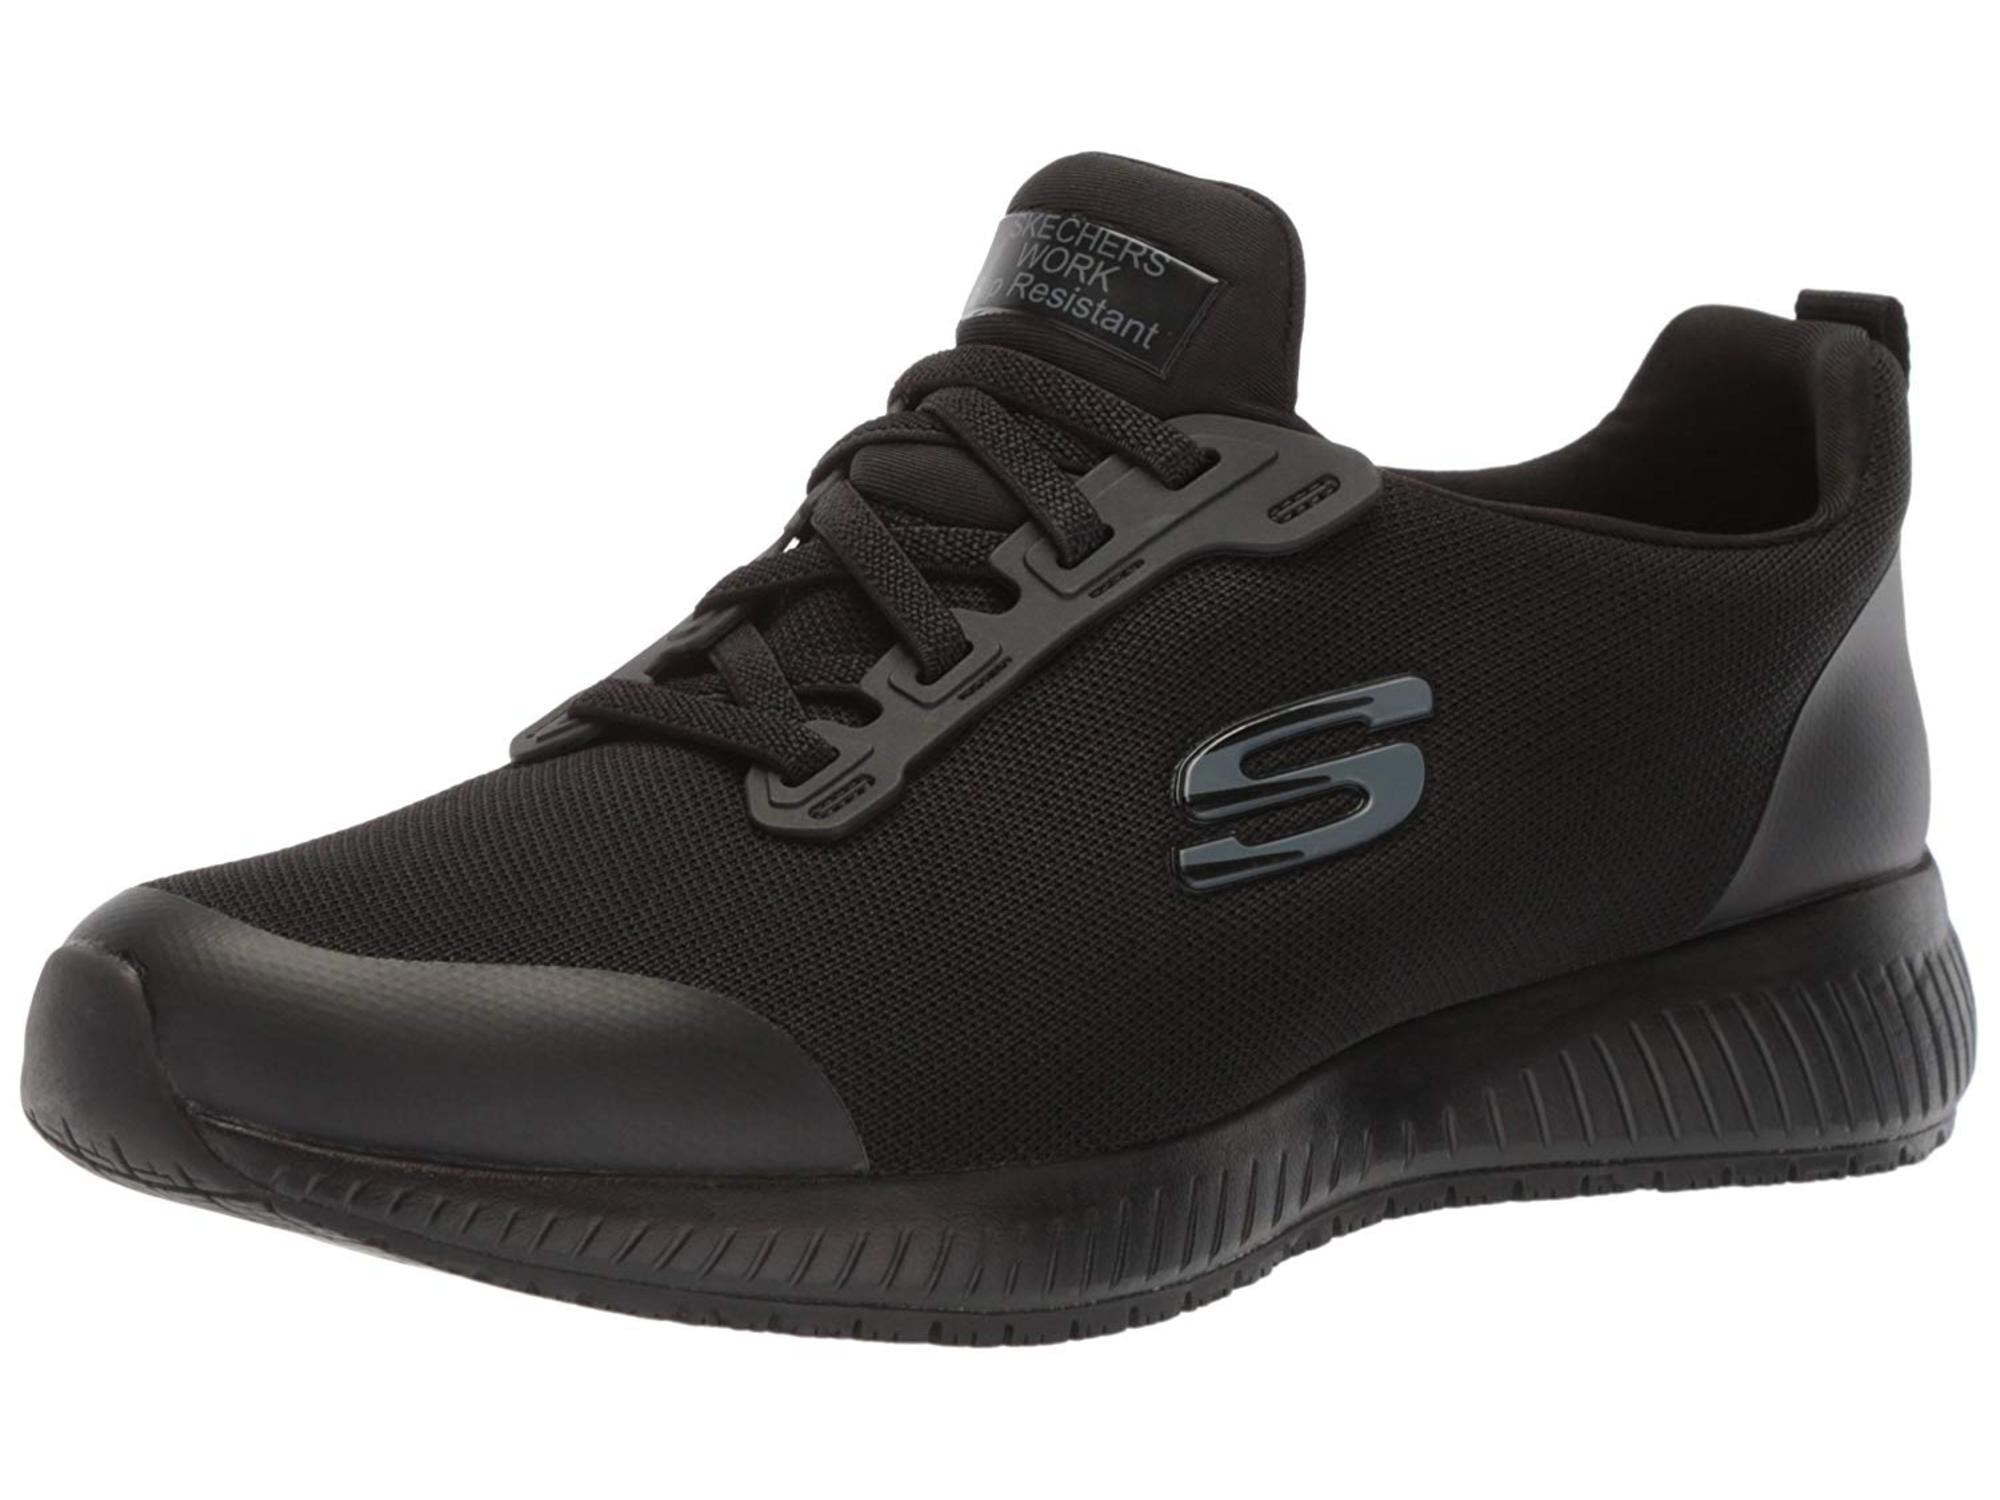 Skechers Mens 77222 Soft toe Slip On Safety Shoes | Walmart Canada